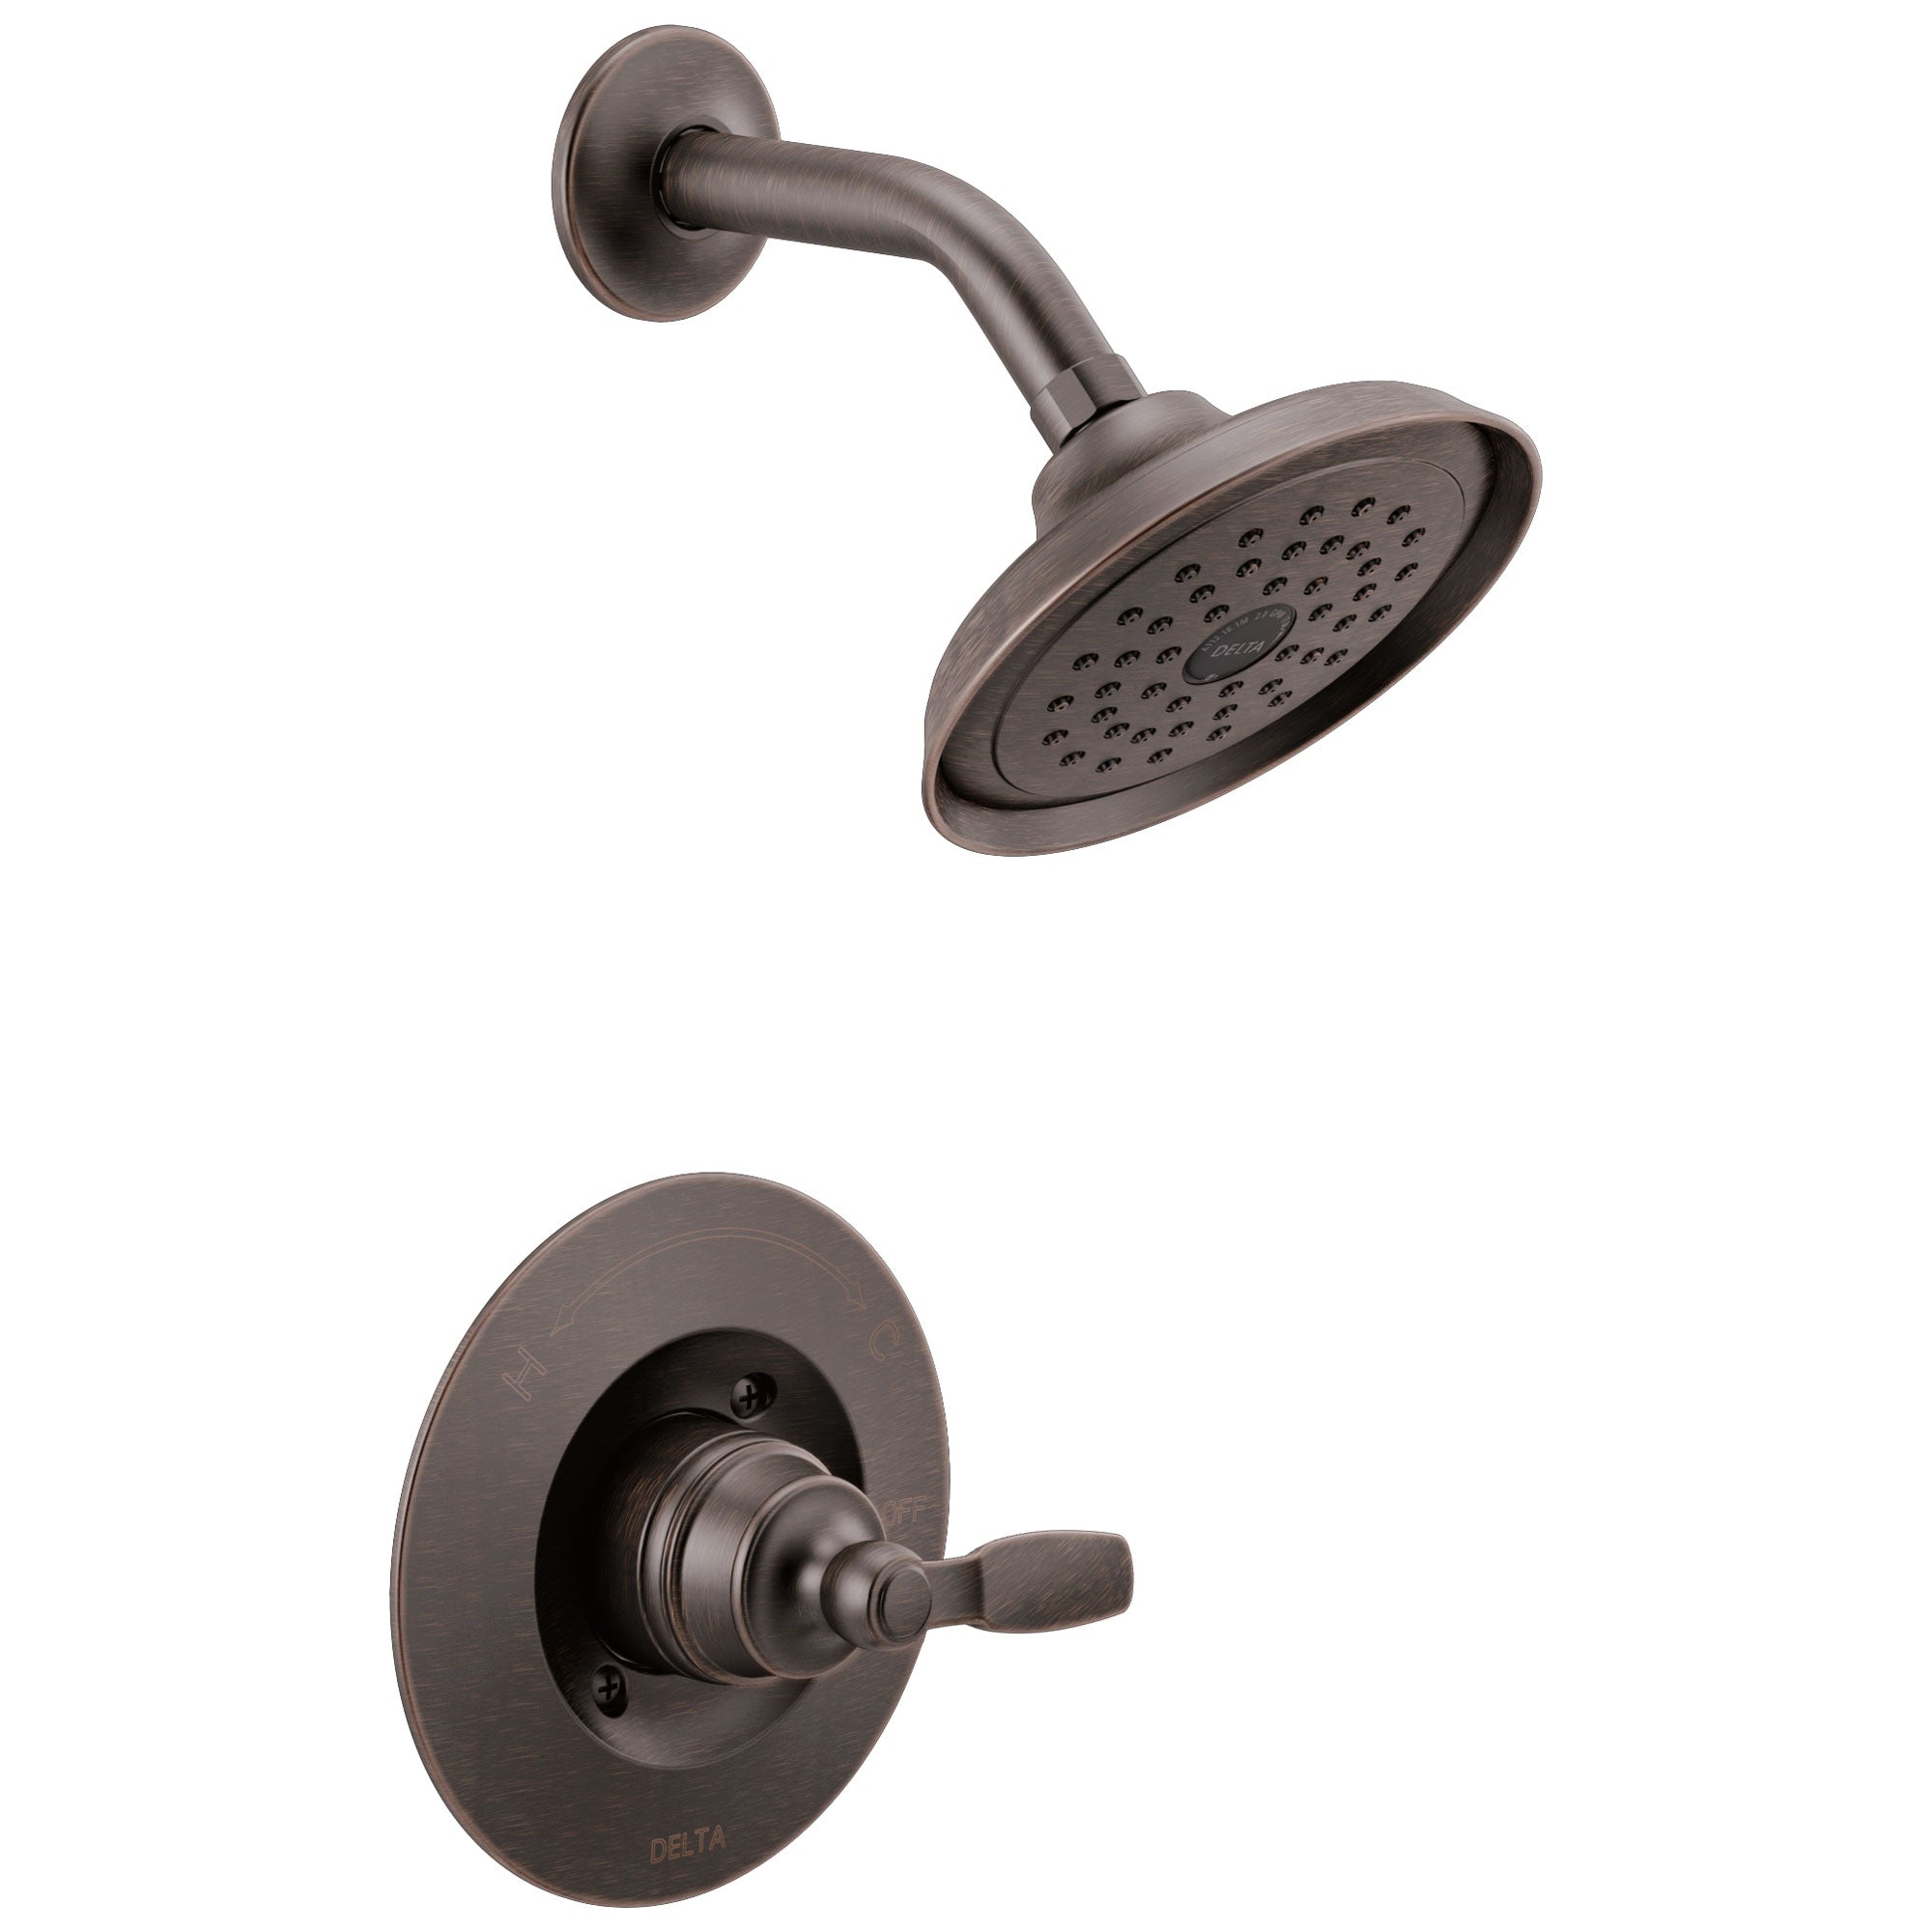 Delta Woodhurst Venetian Bronze Finish Shower only Faucet Includes Single Lever Handle, Cartridge, and Valve with Stops D3520V